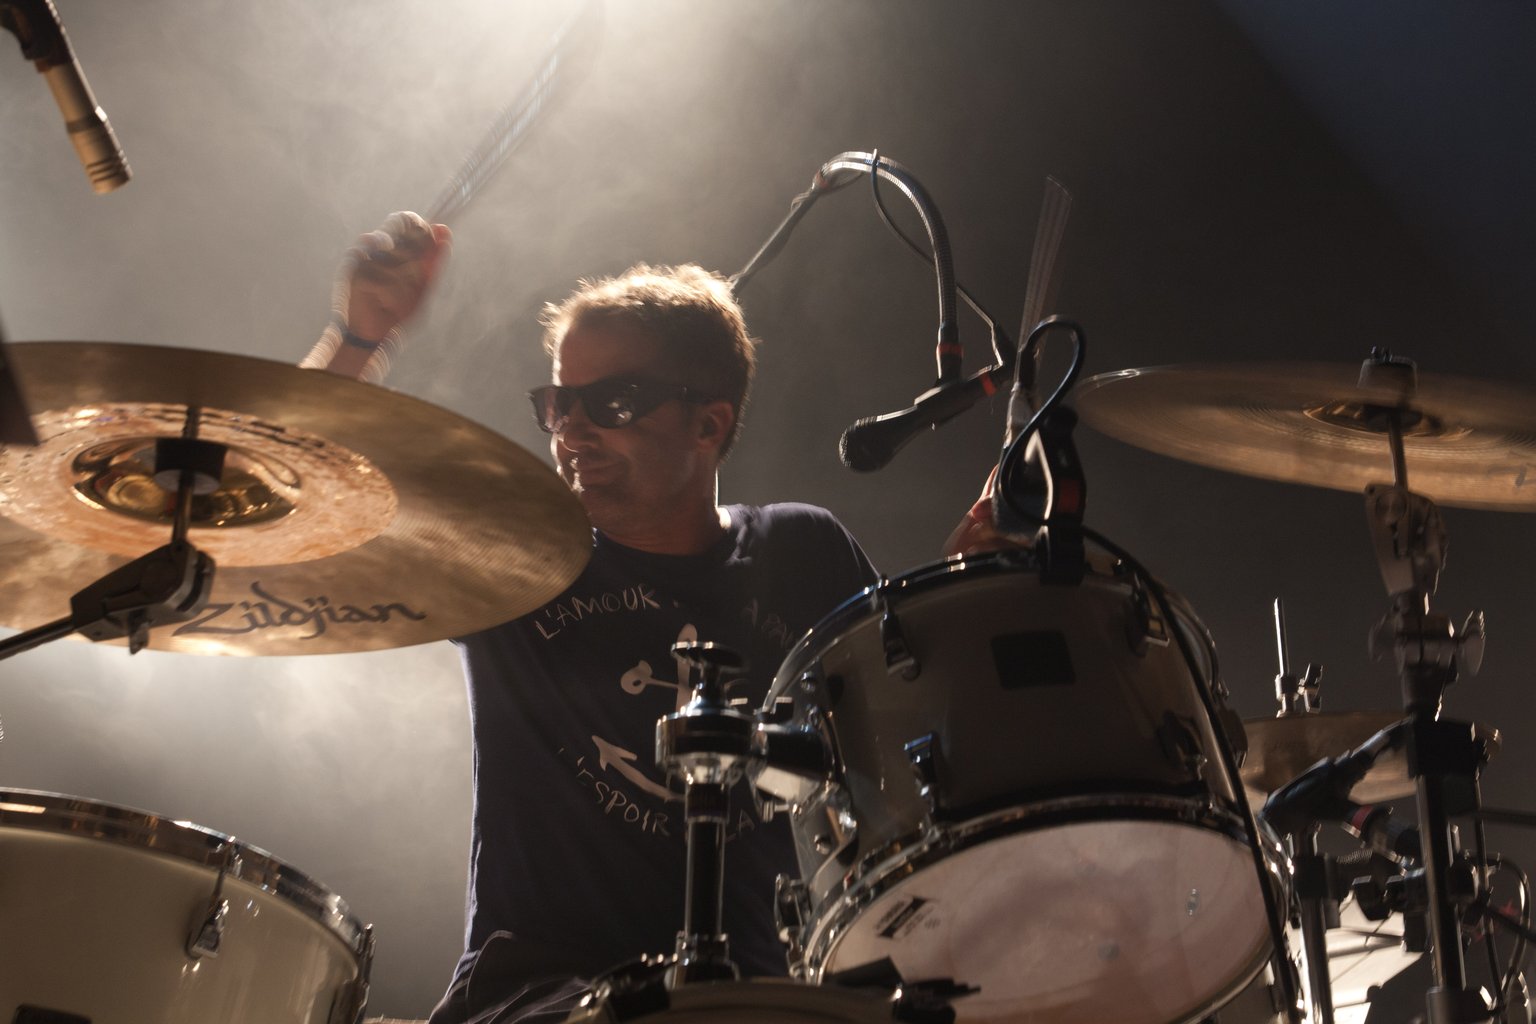 The Ting Tings' drummer is about to smash a cymbal pretty hard